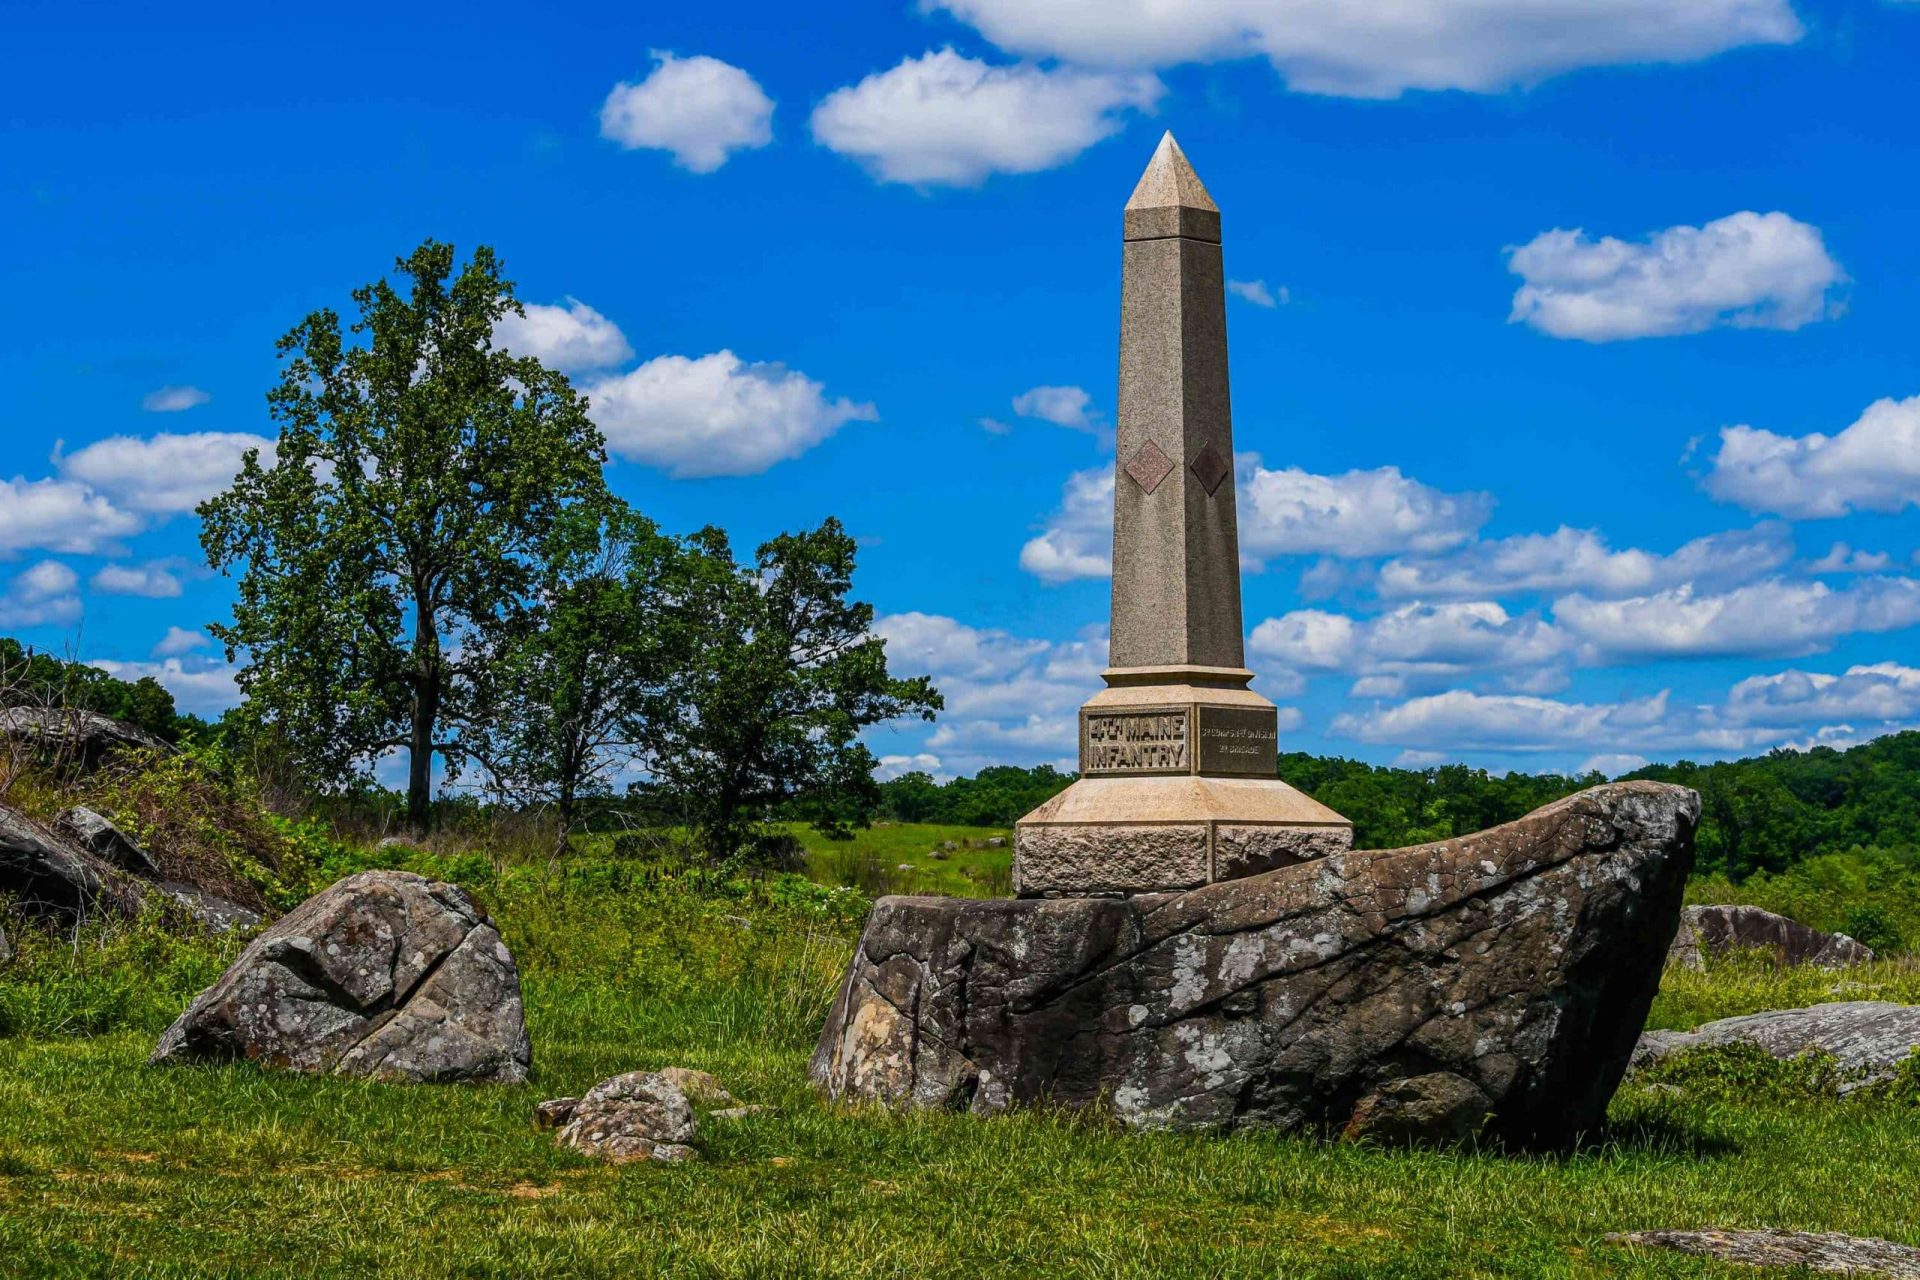 How long is the Gettysburg Auto Tour?